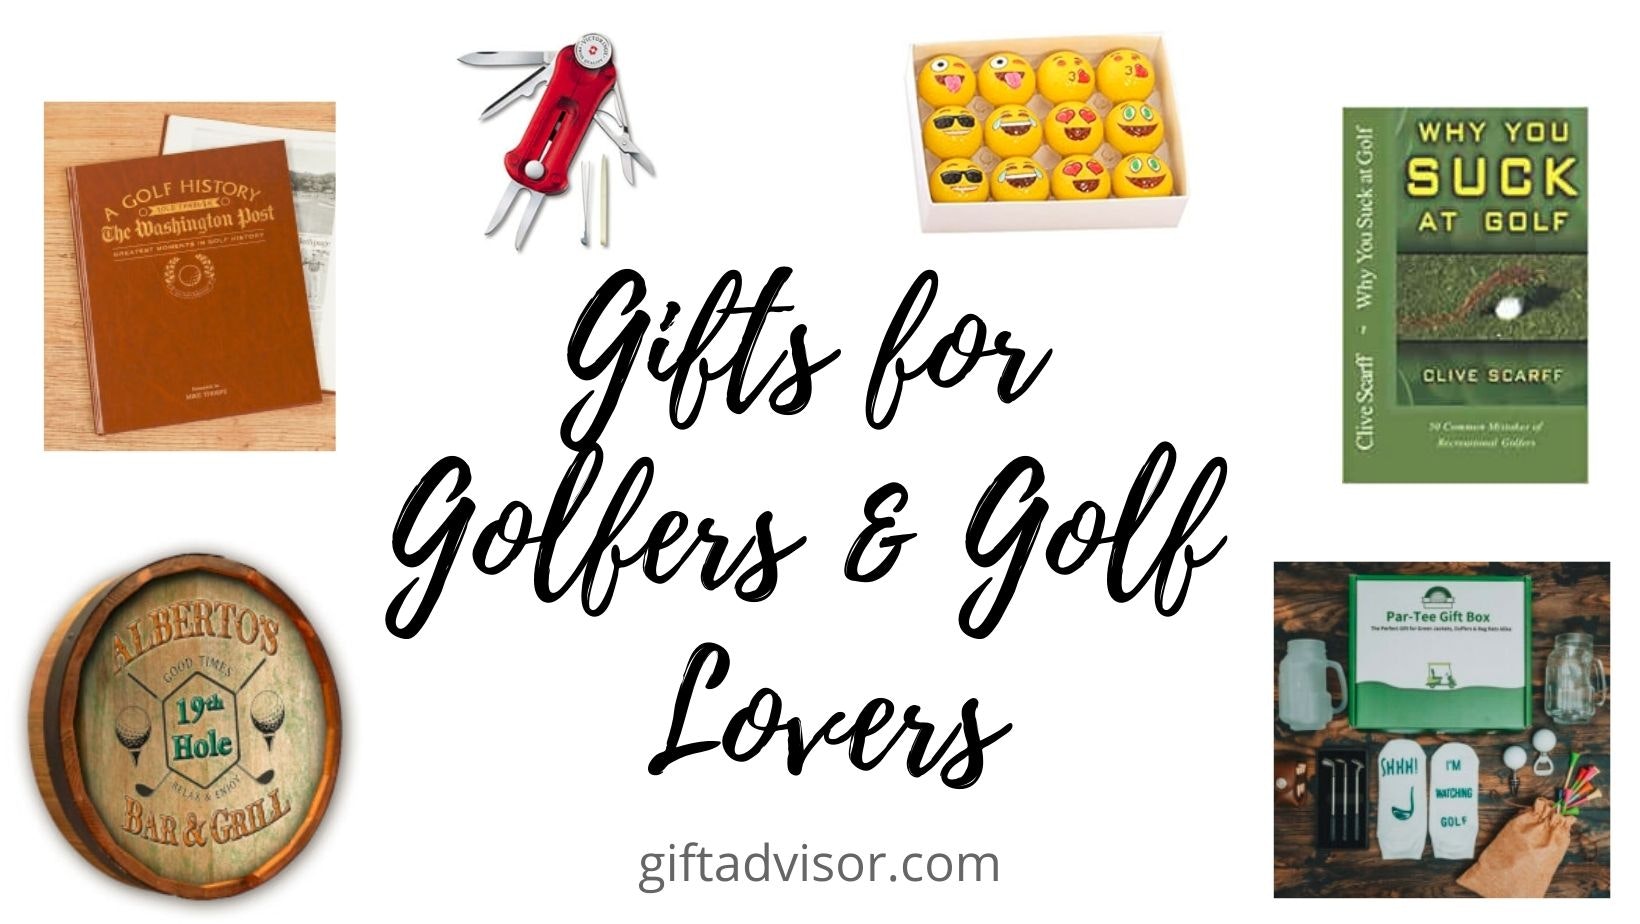 https://giftadvisor.imgix.net/gifts-for-golfers-and-golf-lovers-670039.jpg?fit=crop&max-w=600&max-h=315